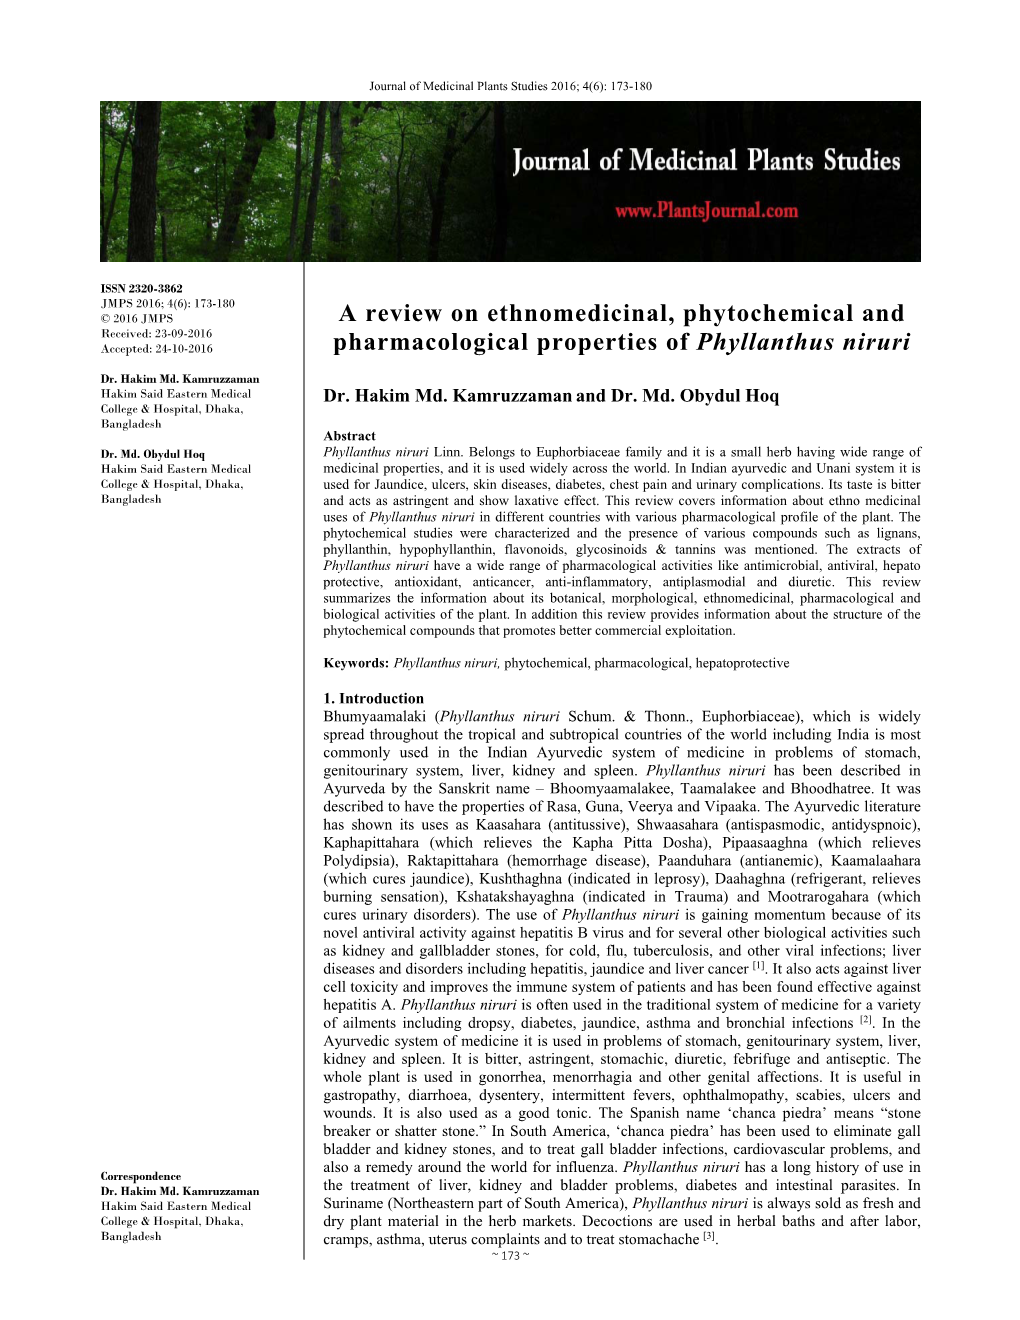 A Review on Ethnomedicinal, Phytochemical and Pharmacological Properties of Phyllanthus Niruri